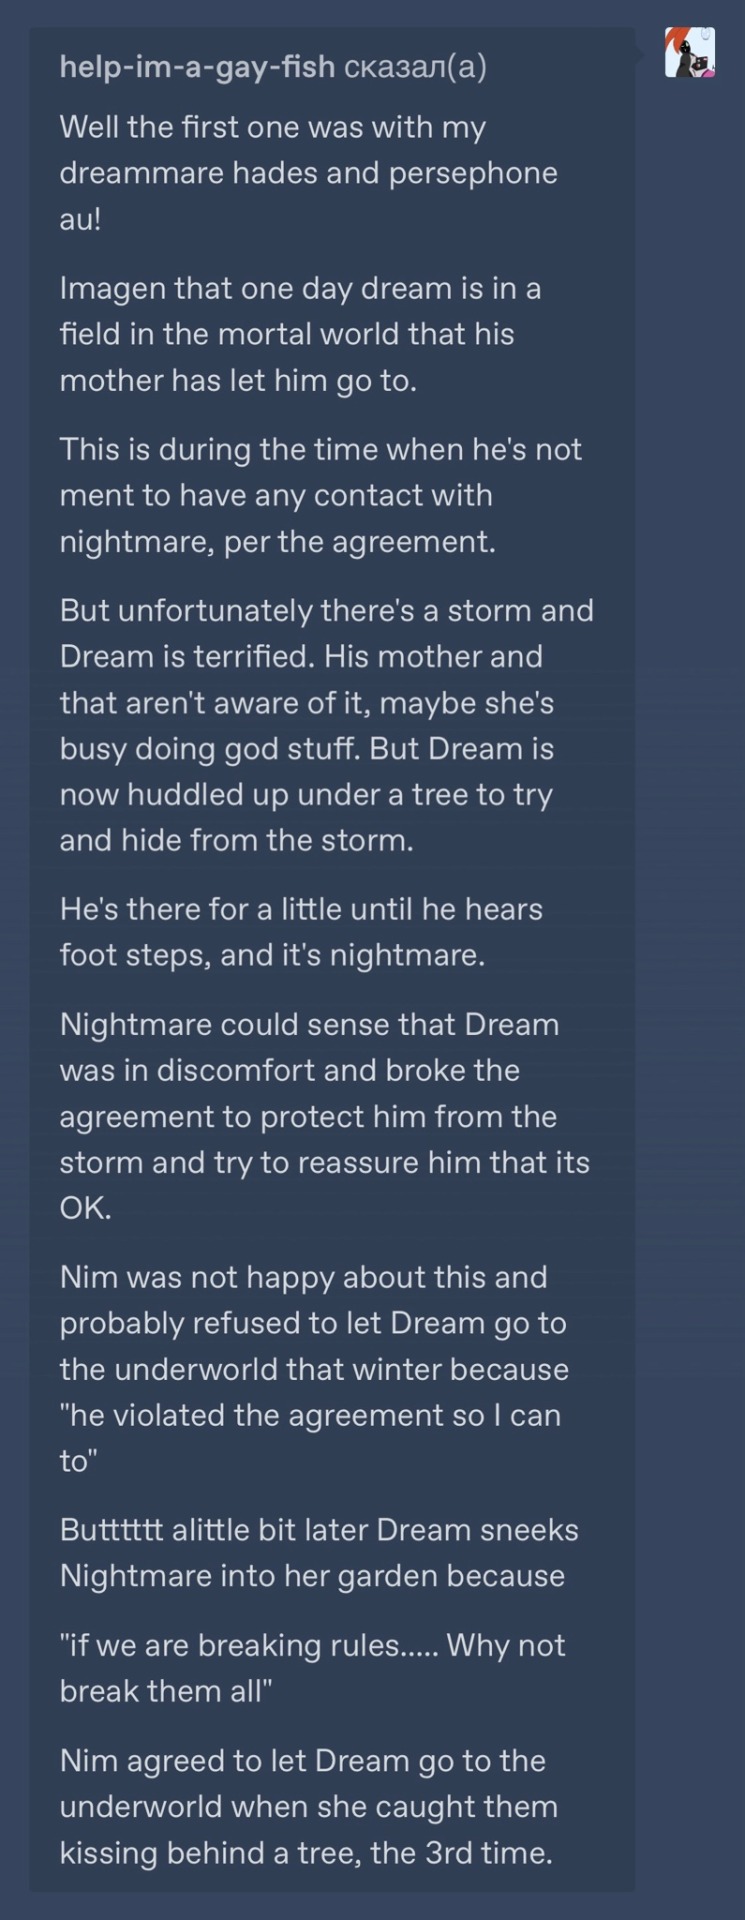 Dream came to terms. His Nightmare is dead. - - - - I headcannon that